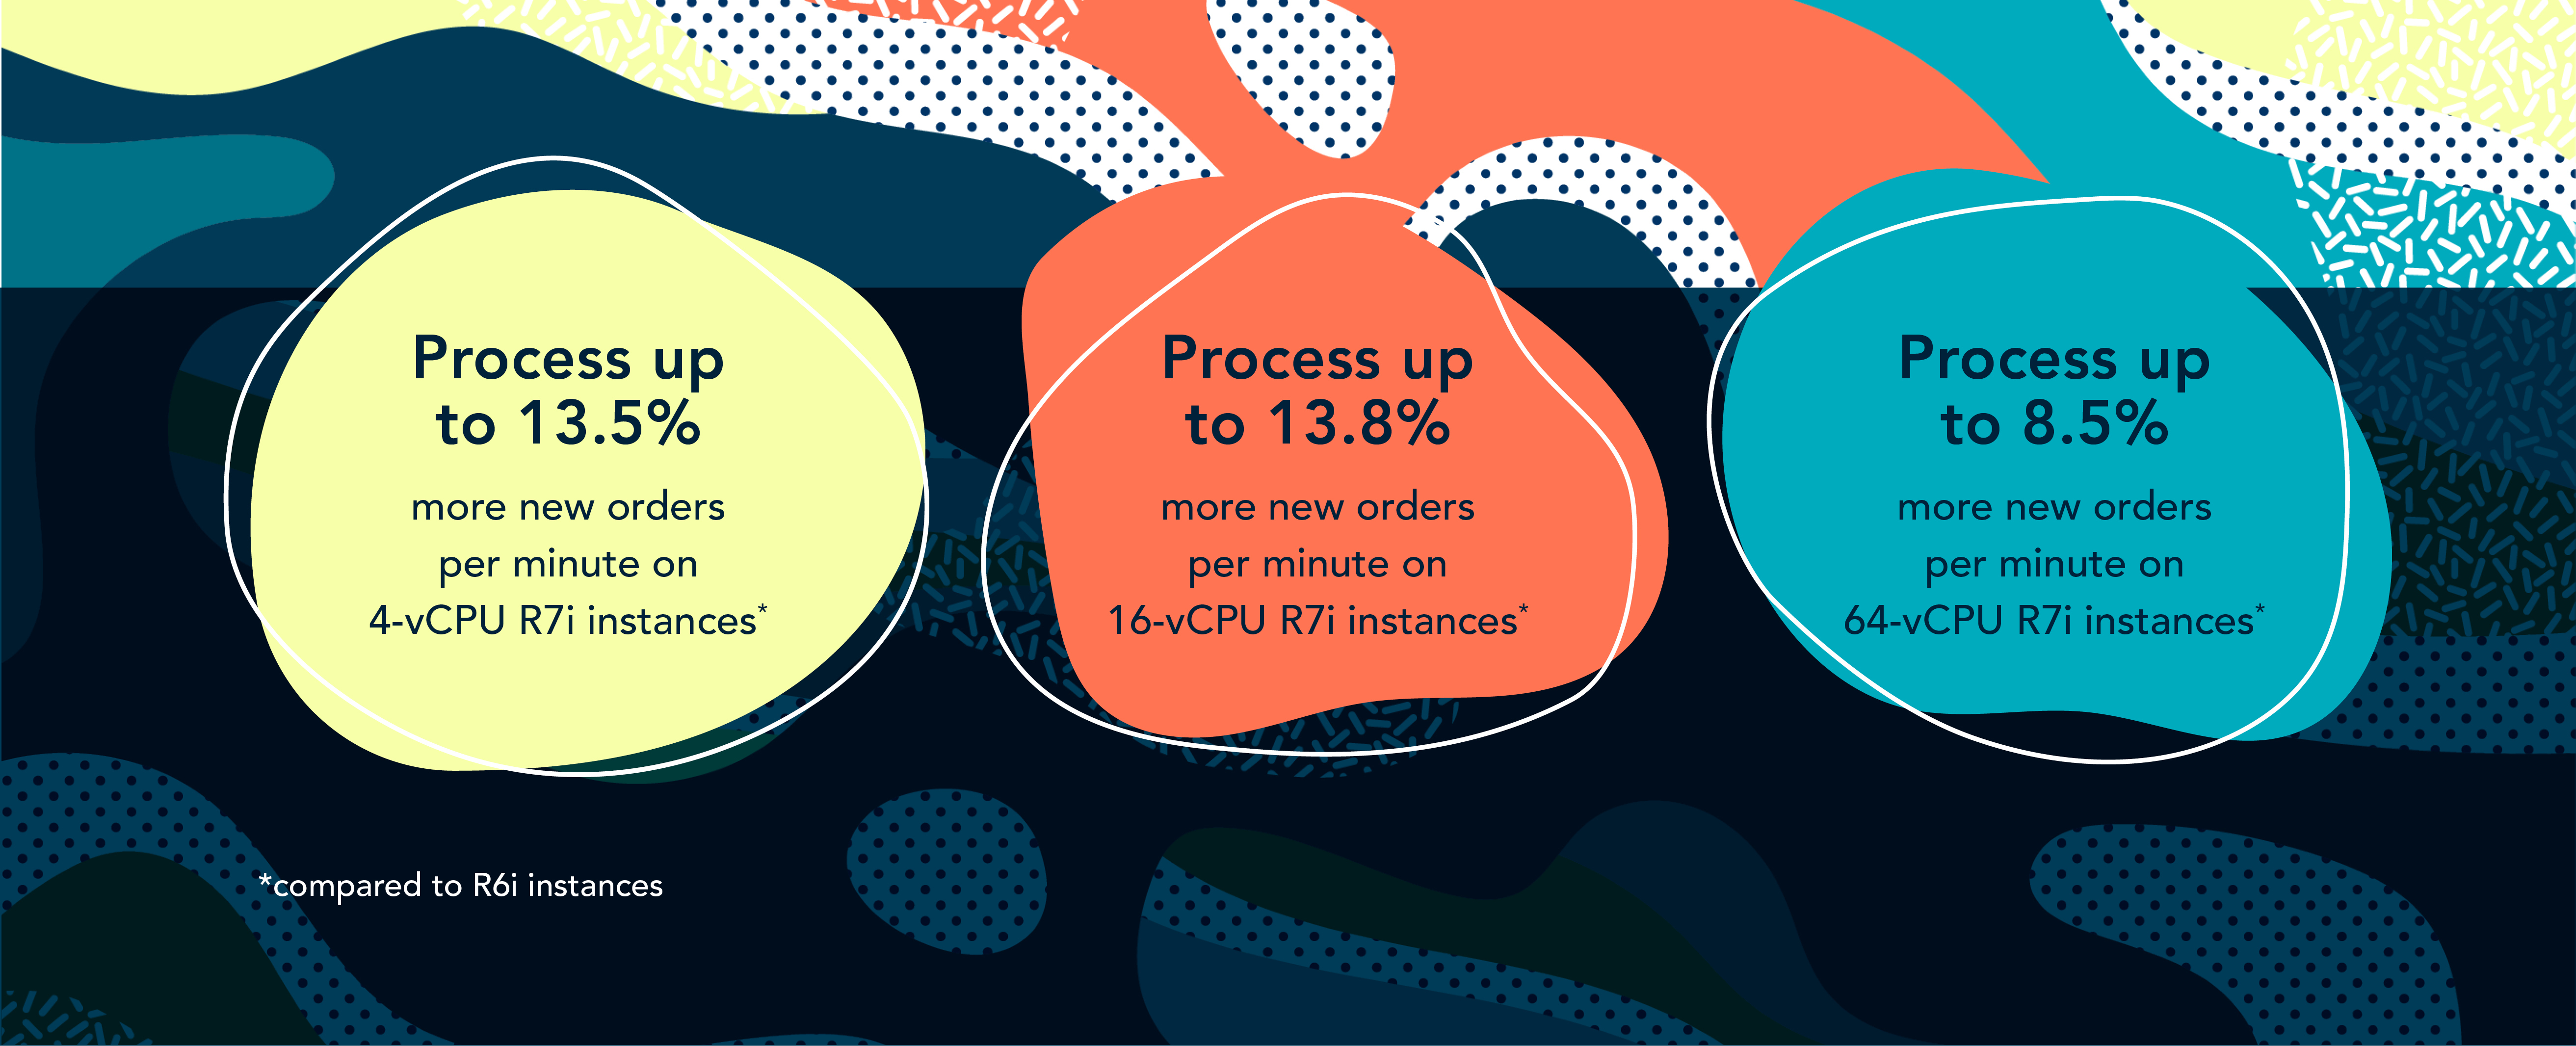 Process up to 13.5% more new orders per minute on 4-vCPU R7i instances vs. R6i instances. Process up to 13.8% more new orders per minute on 16-vCPU R7i instances vs. R6i instances. Process up to 8.5% more new orders per minute on 64-vCPU R7i instances vs. R6i instances.